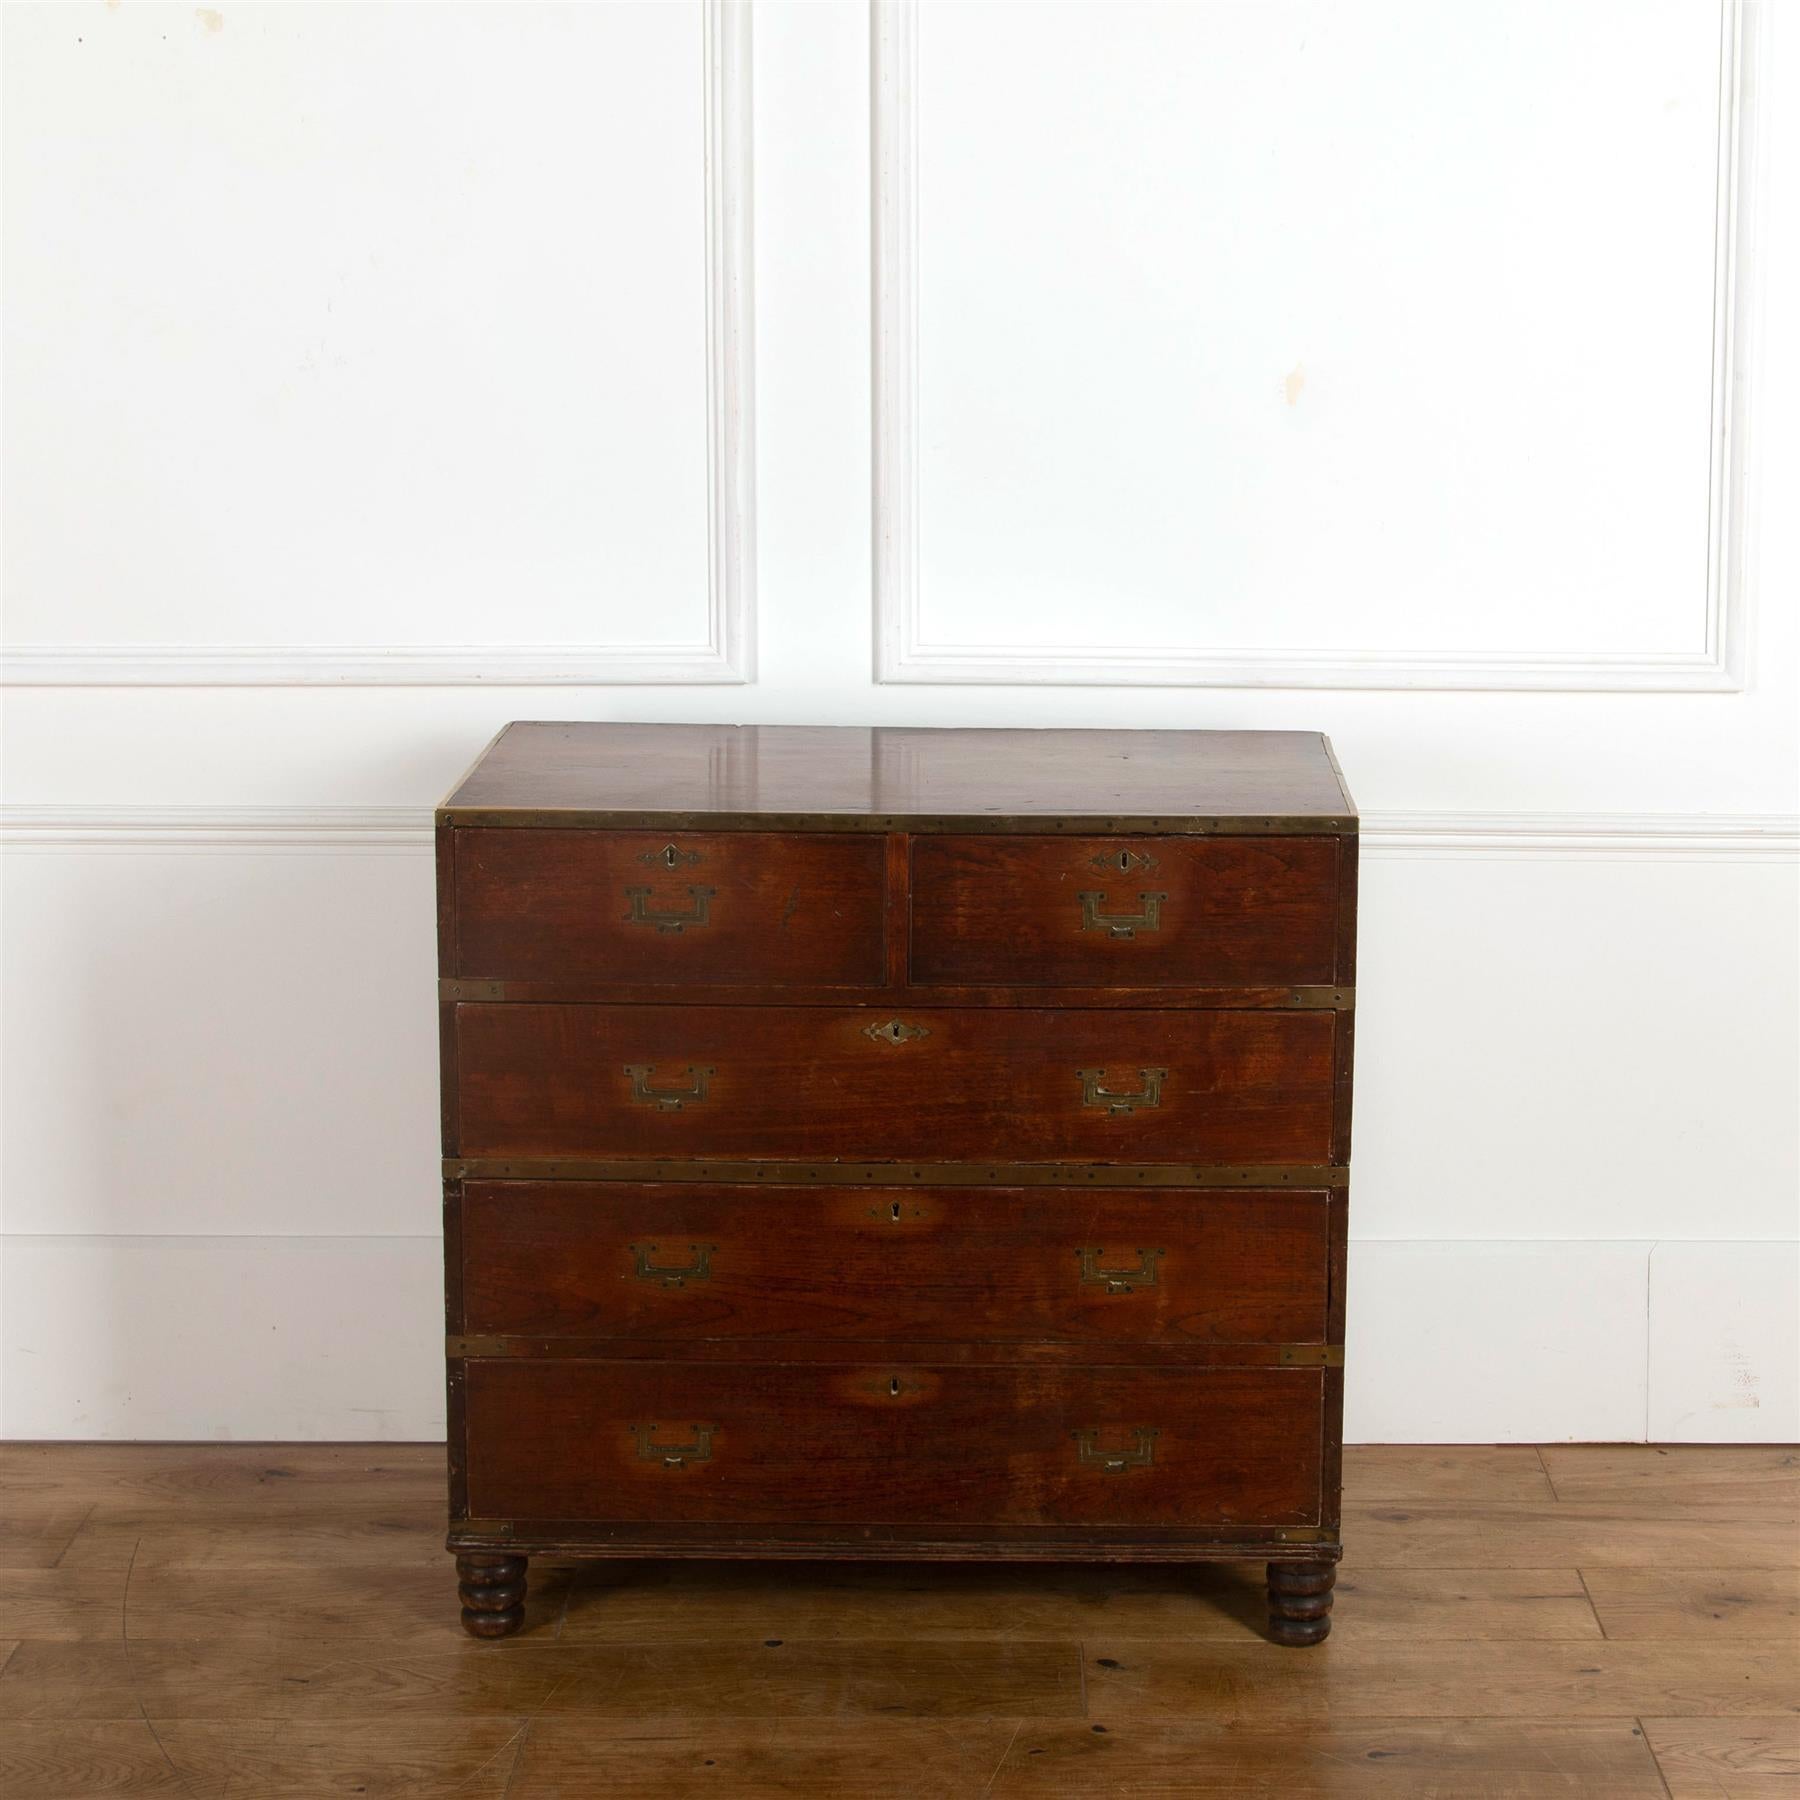 An early 19th century teak, brass bound two part military chest of drawers.